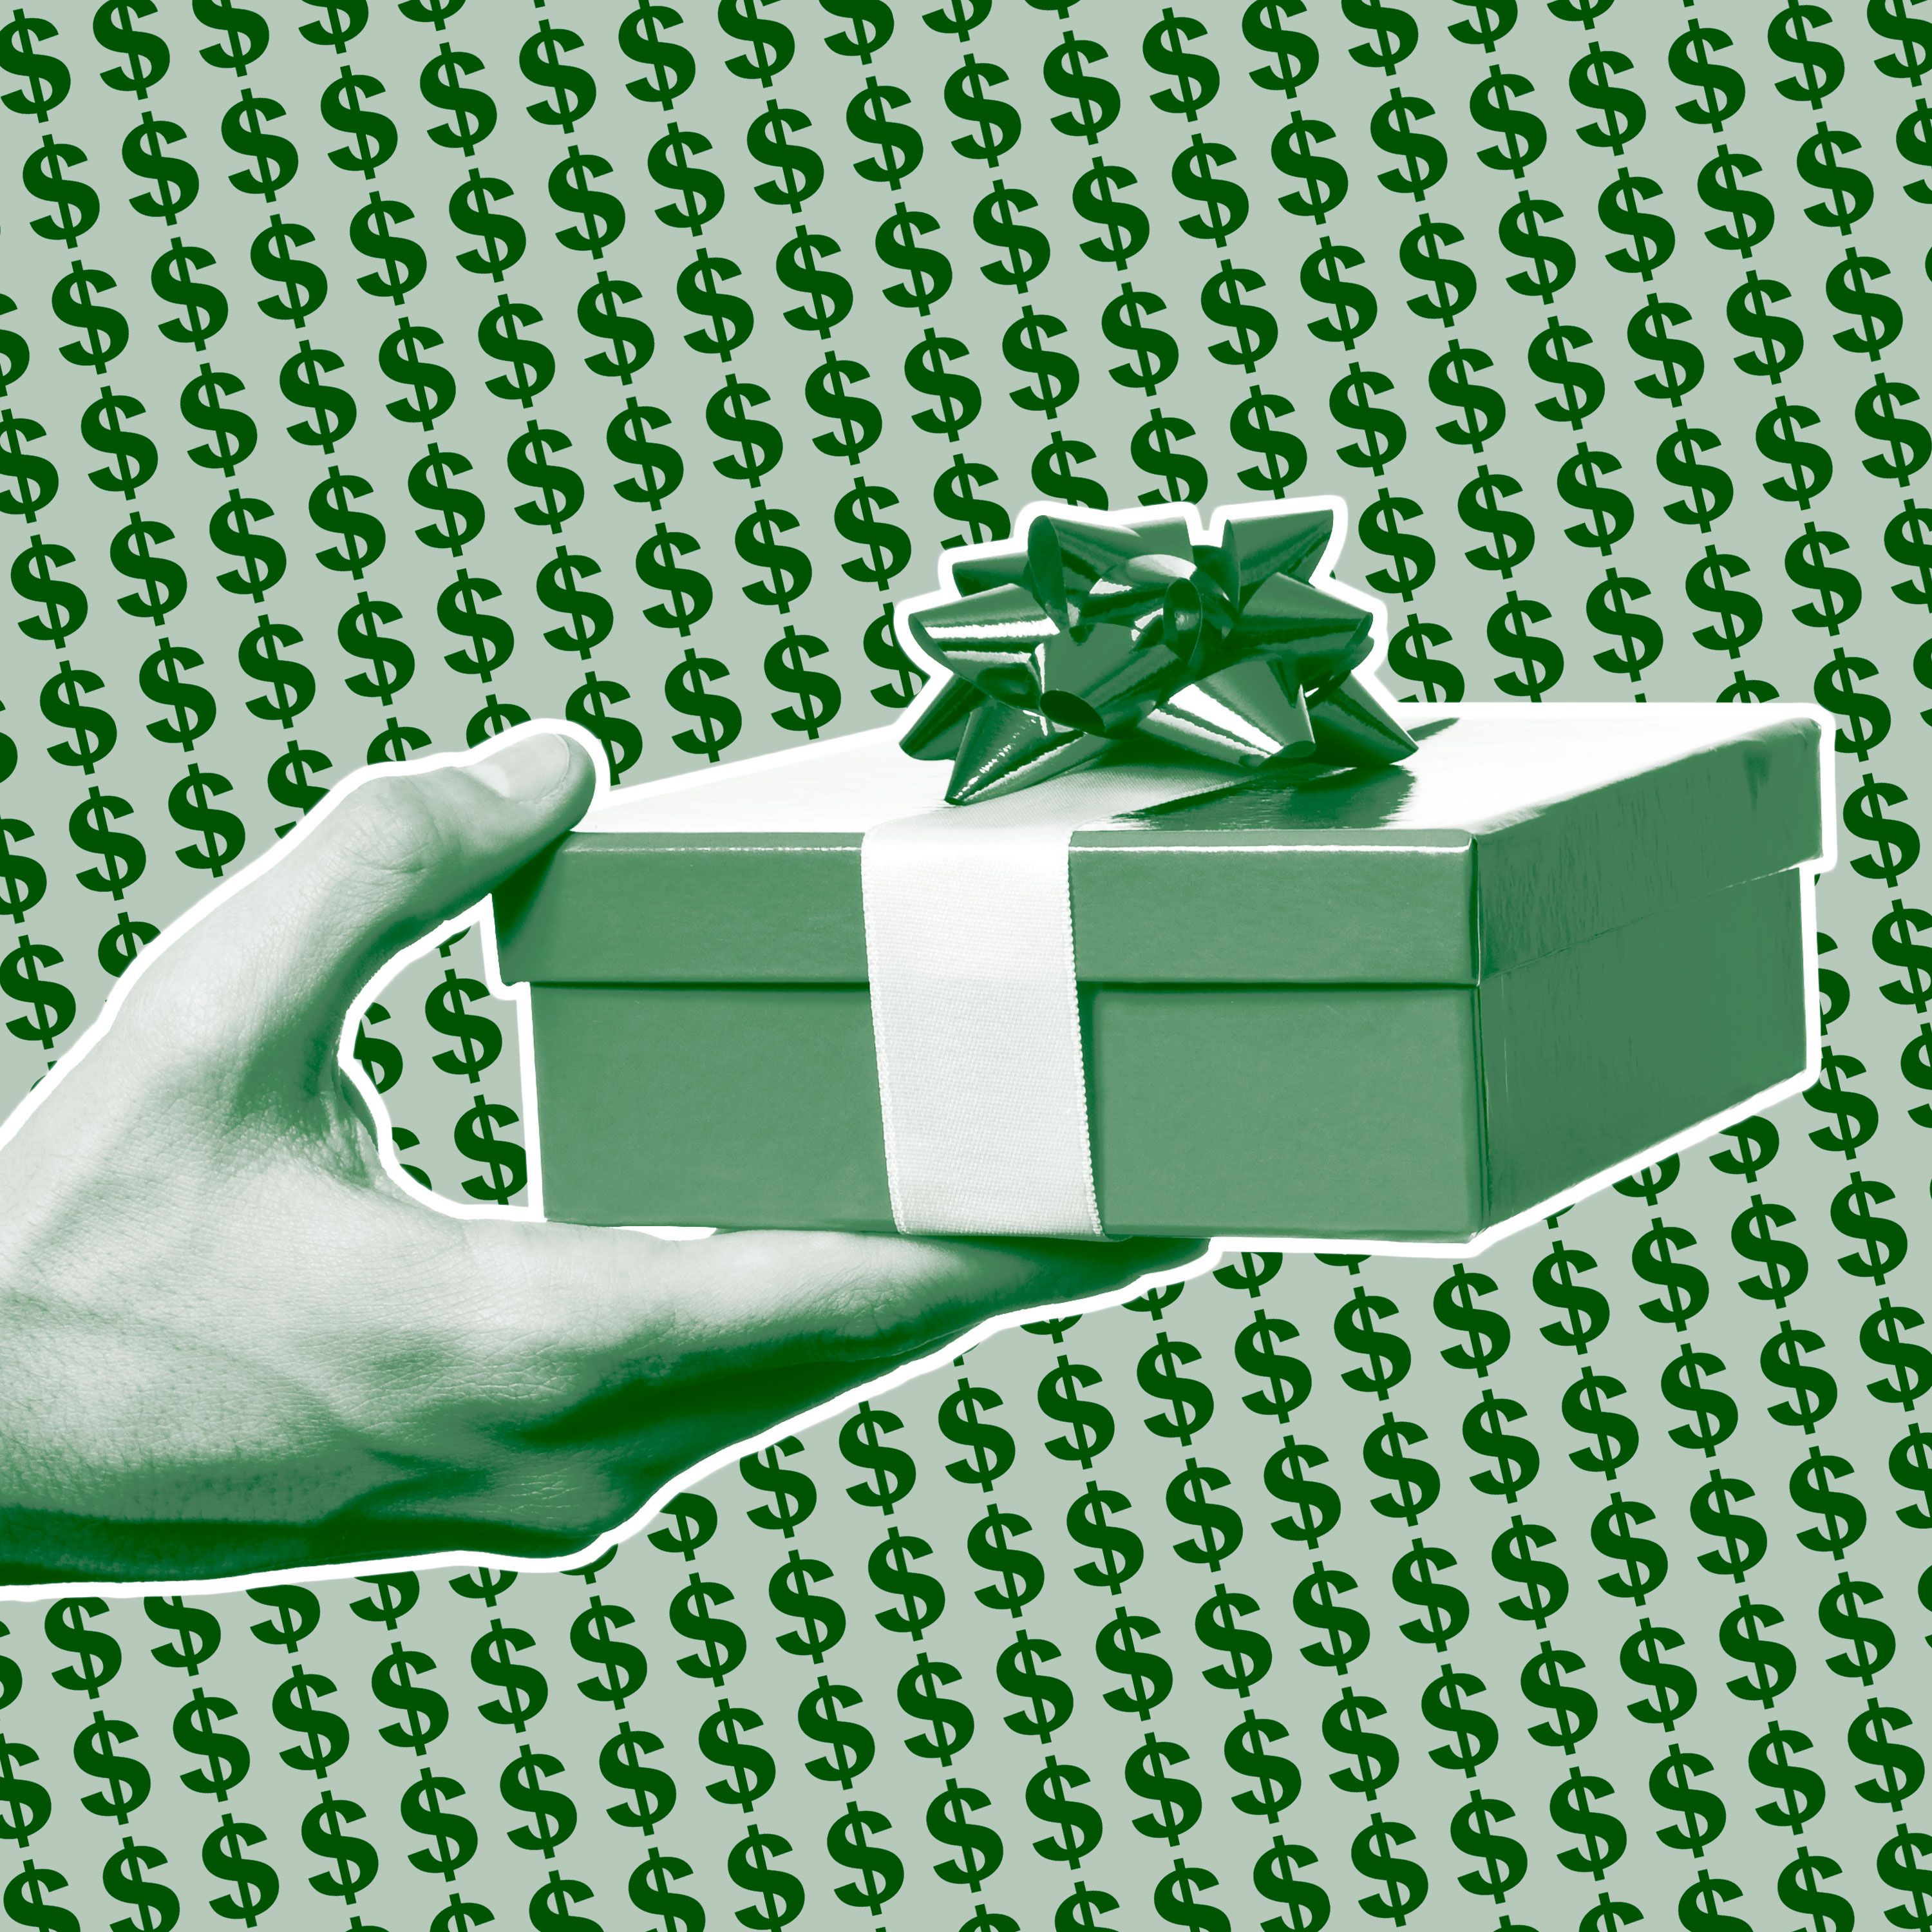 Why Giving A Christmas Wish List Is A Gift In Itself